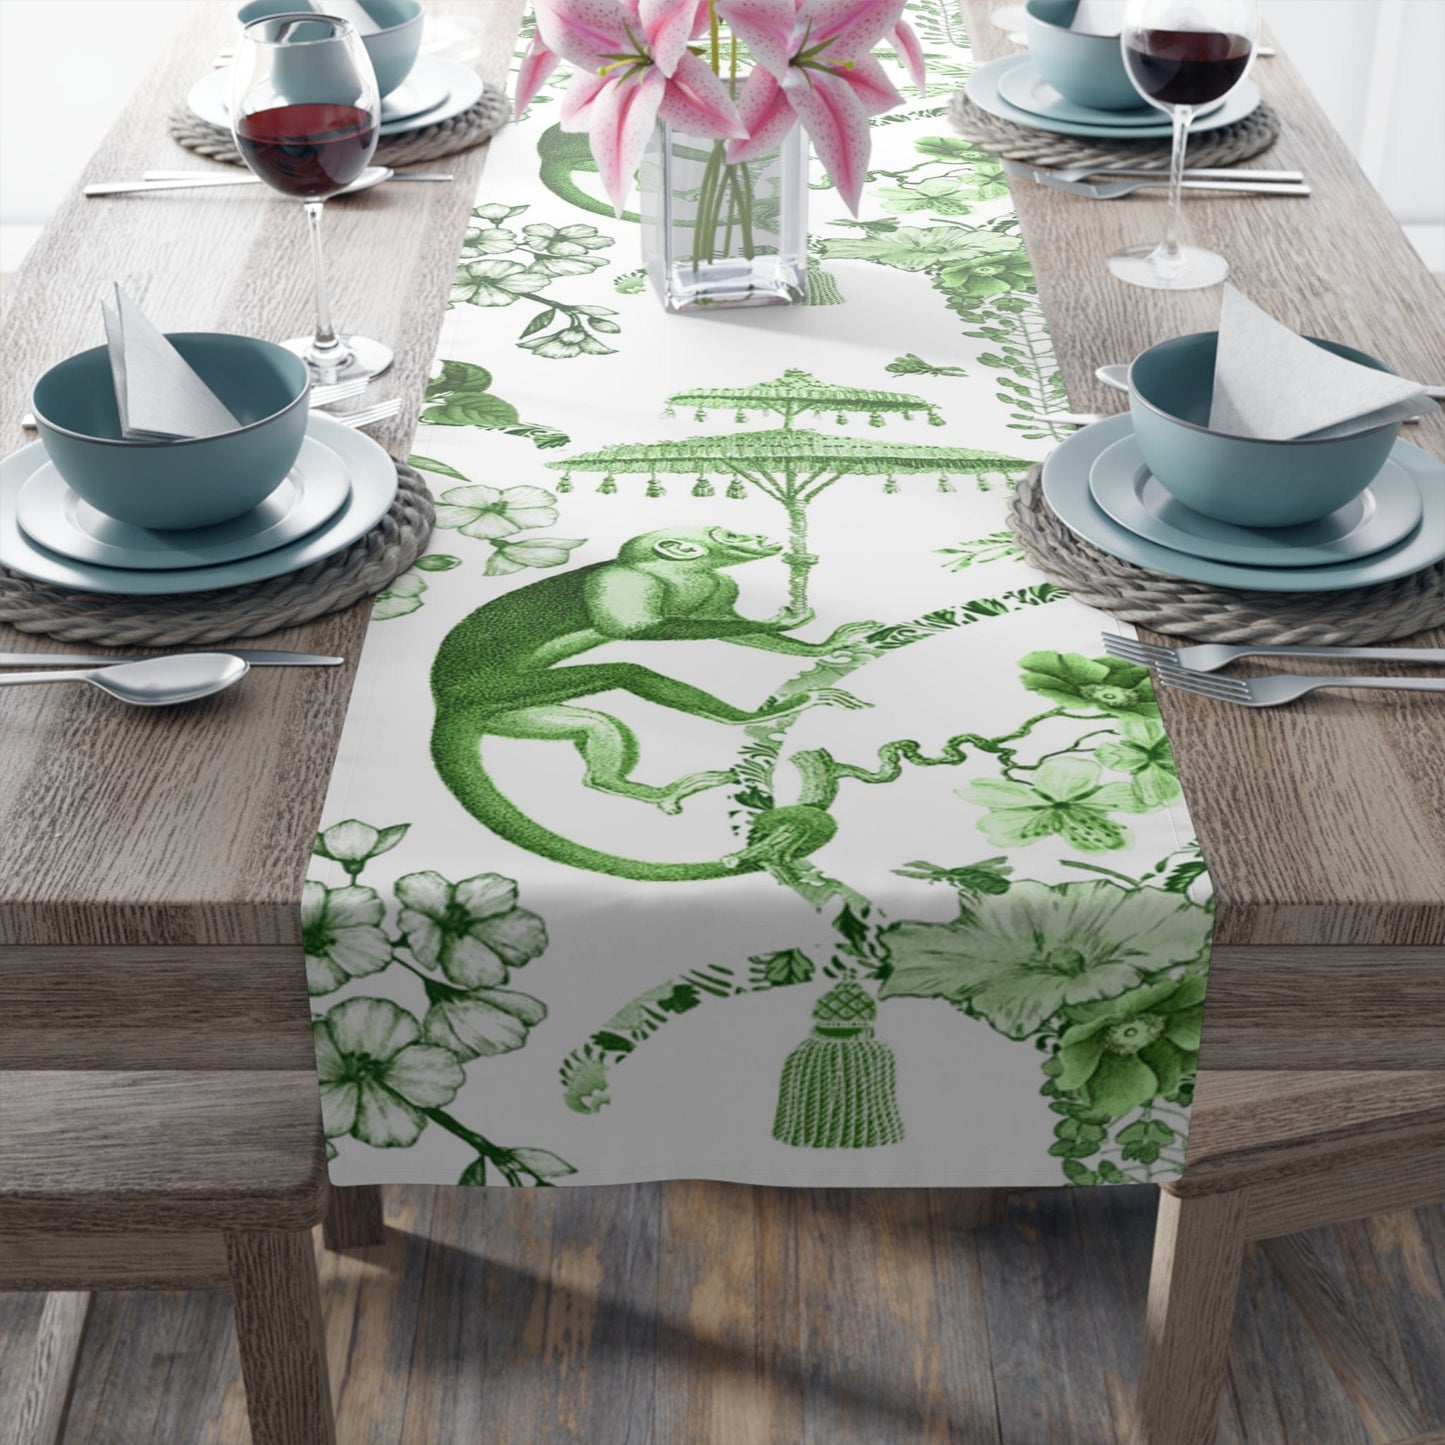 Printify Chinoiserie Botanical Toile Table Runner, Floral Green, White Chinoiserie Jungle, Country Farmhouse Grandmillenial Table Decor Home Decor 16" × 90" / Polyester 30339262259070302205